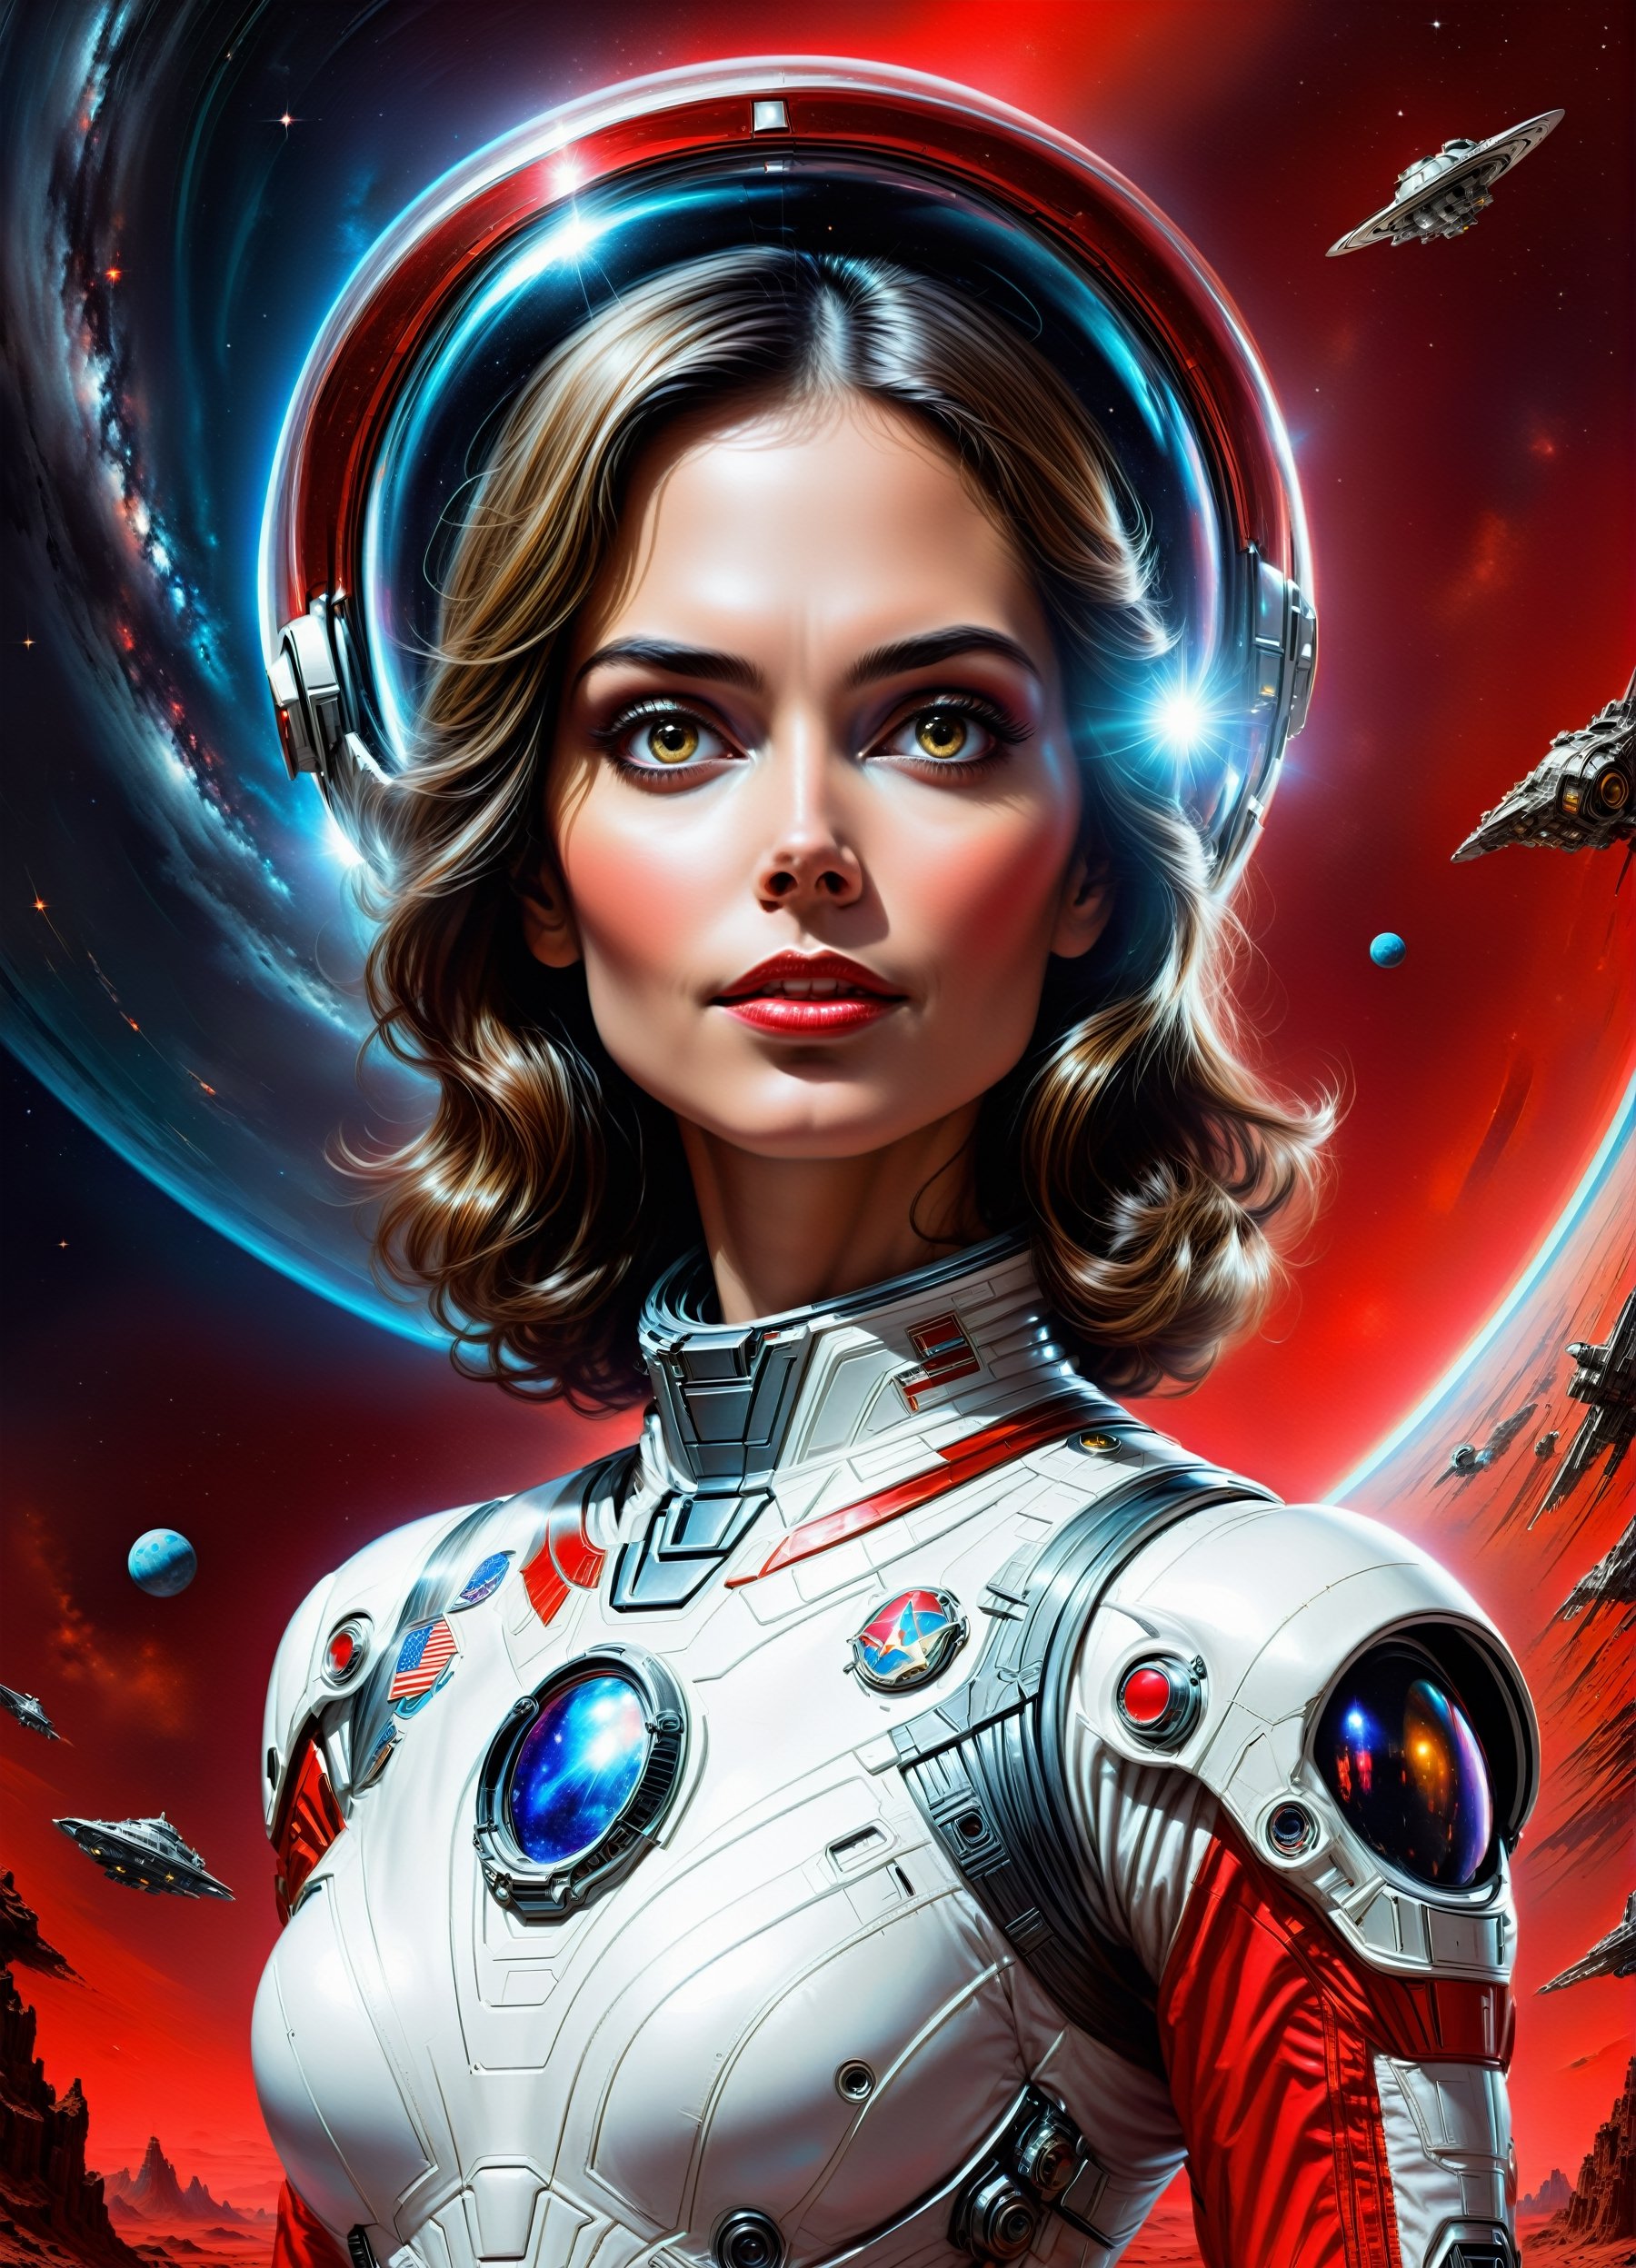 image of a white woman in a futuristic suit with a spaceship in the background, movie art, in front of an red and silver background, inspired by Robert McGinnis, female protagonist, megastructure in the background, portrait of an ai astronaut, astronauts, an astronaut, portrait of a astronaut skeletor, perfect android girl, detailed eyes, perfectly detailed teeth, frank franzzeta and sakimichan